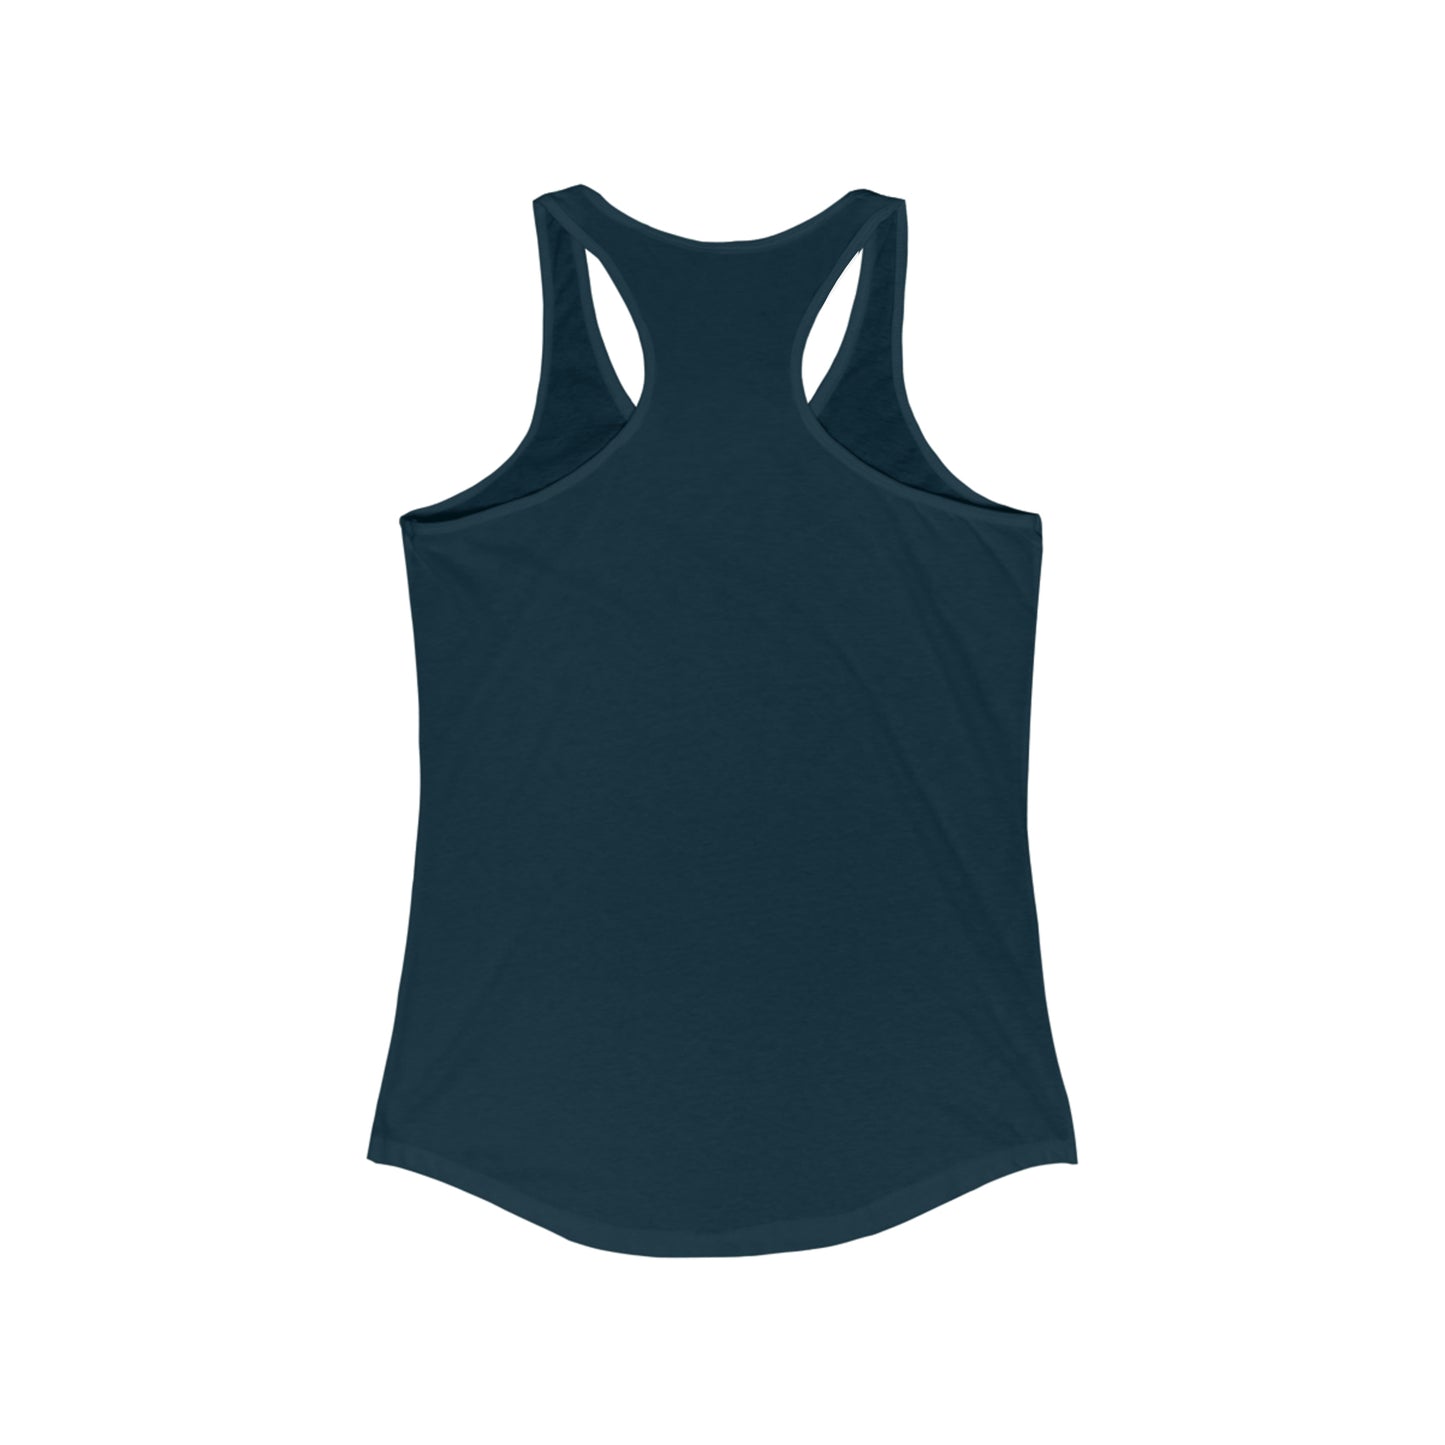 Fet's Luck You read that wrong didn't you?–Pineapple First Mate–Women's Ideal Racerback Tank